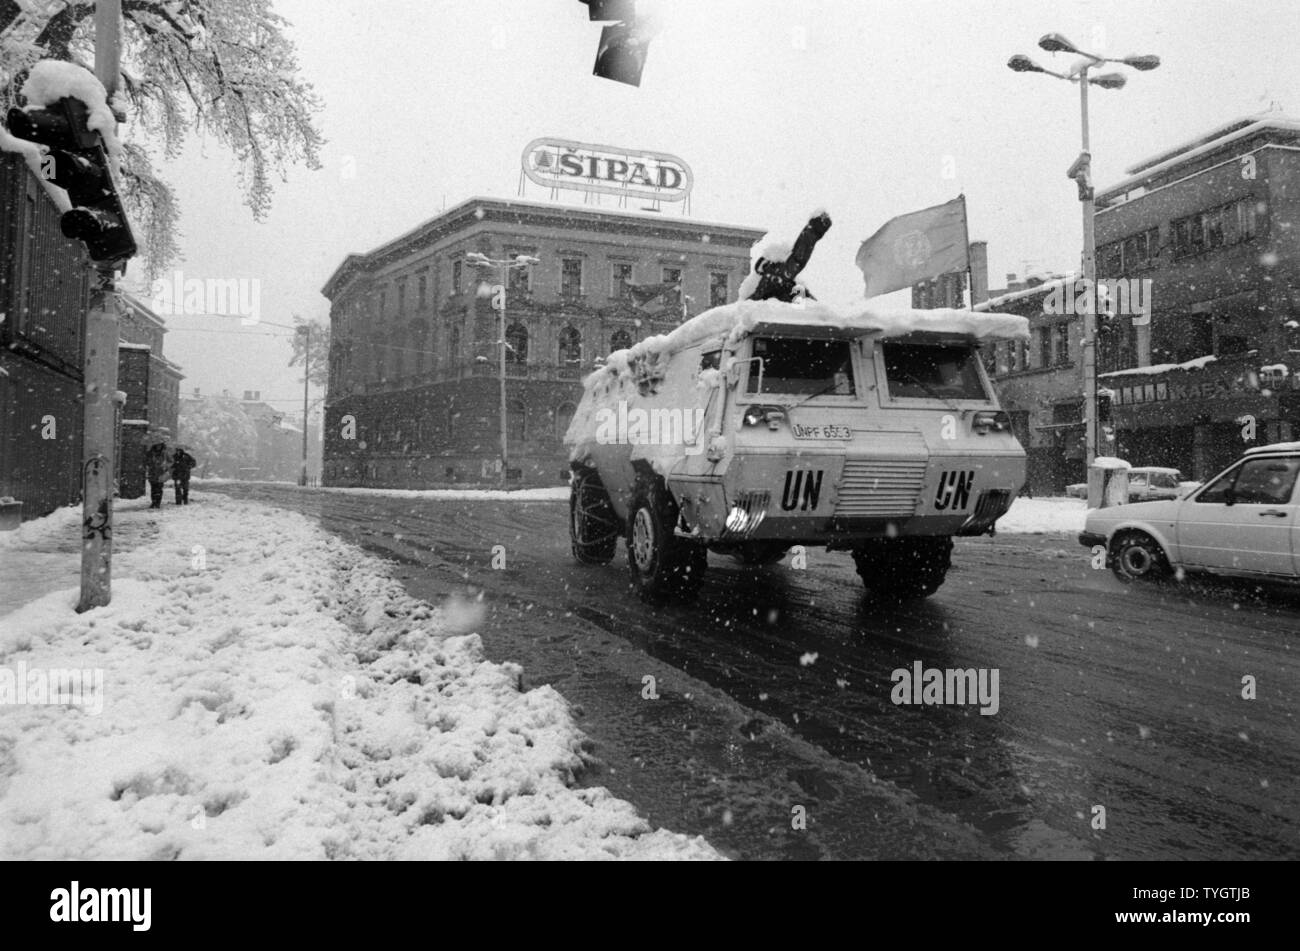 26th March 1993 During the Siege of Sarajevo: an Egyptian Fahd APC (armoured personnel carrier), part of the United Nations forces of UNPROFOR, drives through falling snow on Marsala Tita Street. Stock Photo